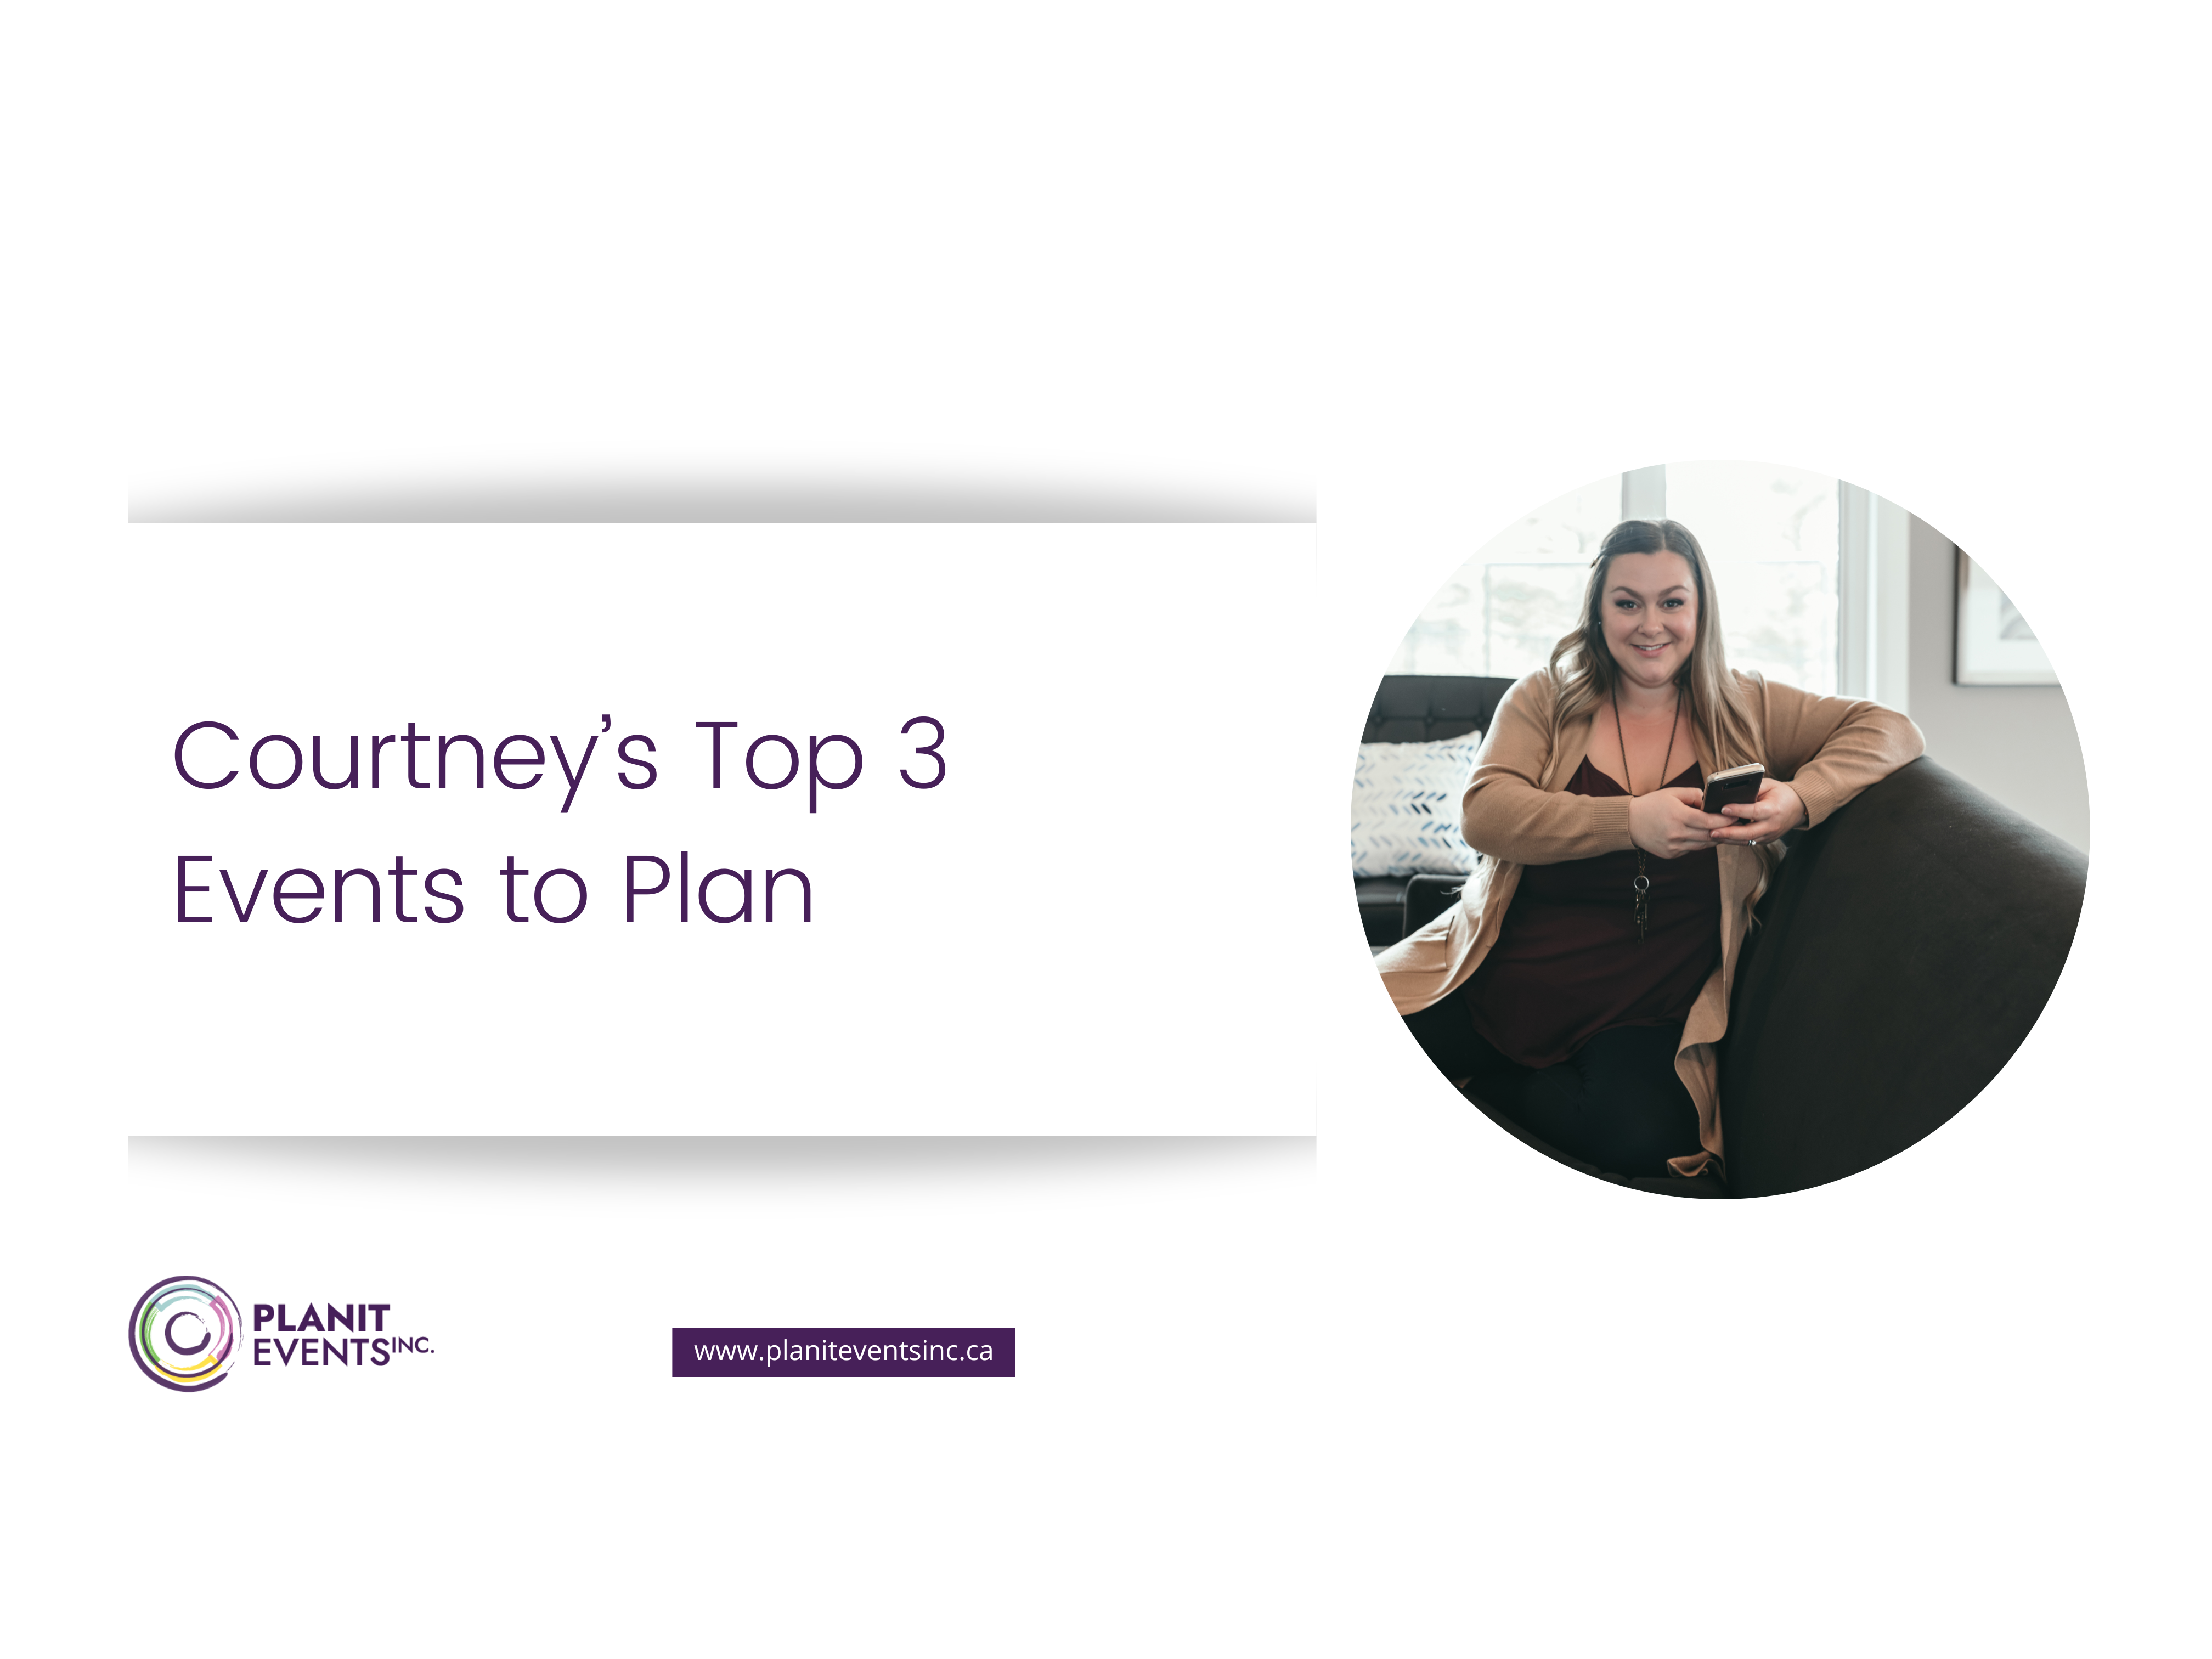 Courtney’s Top 3 Events to Plan